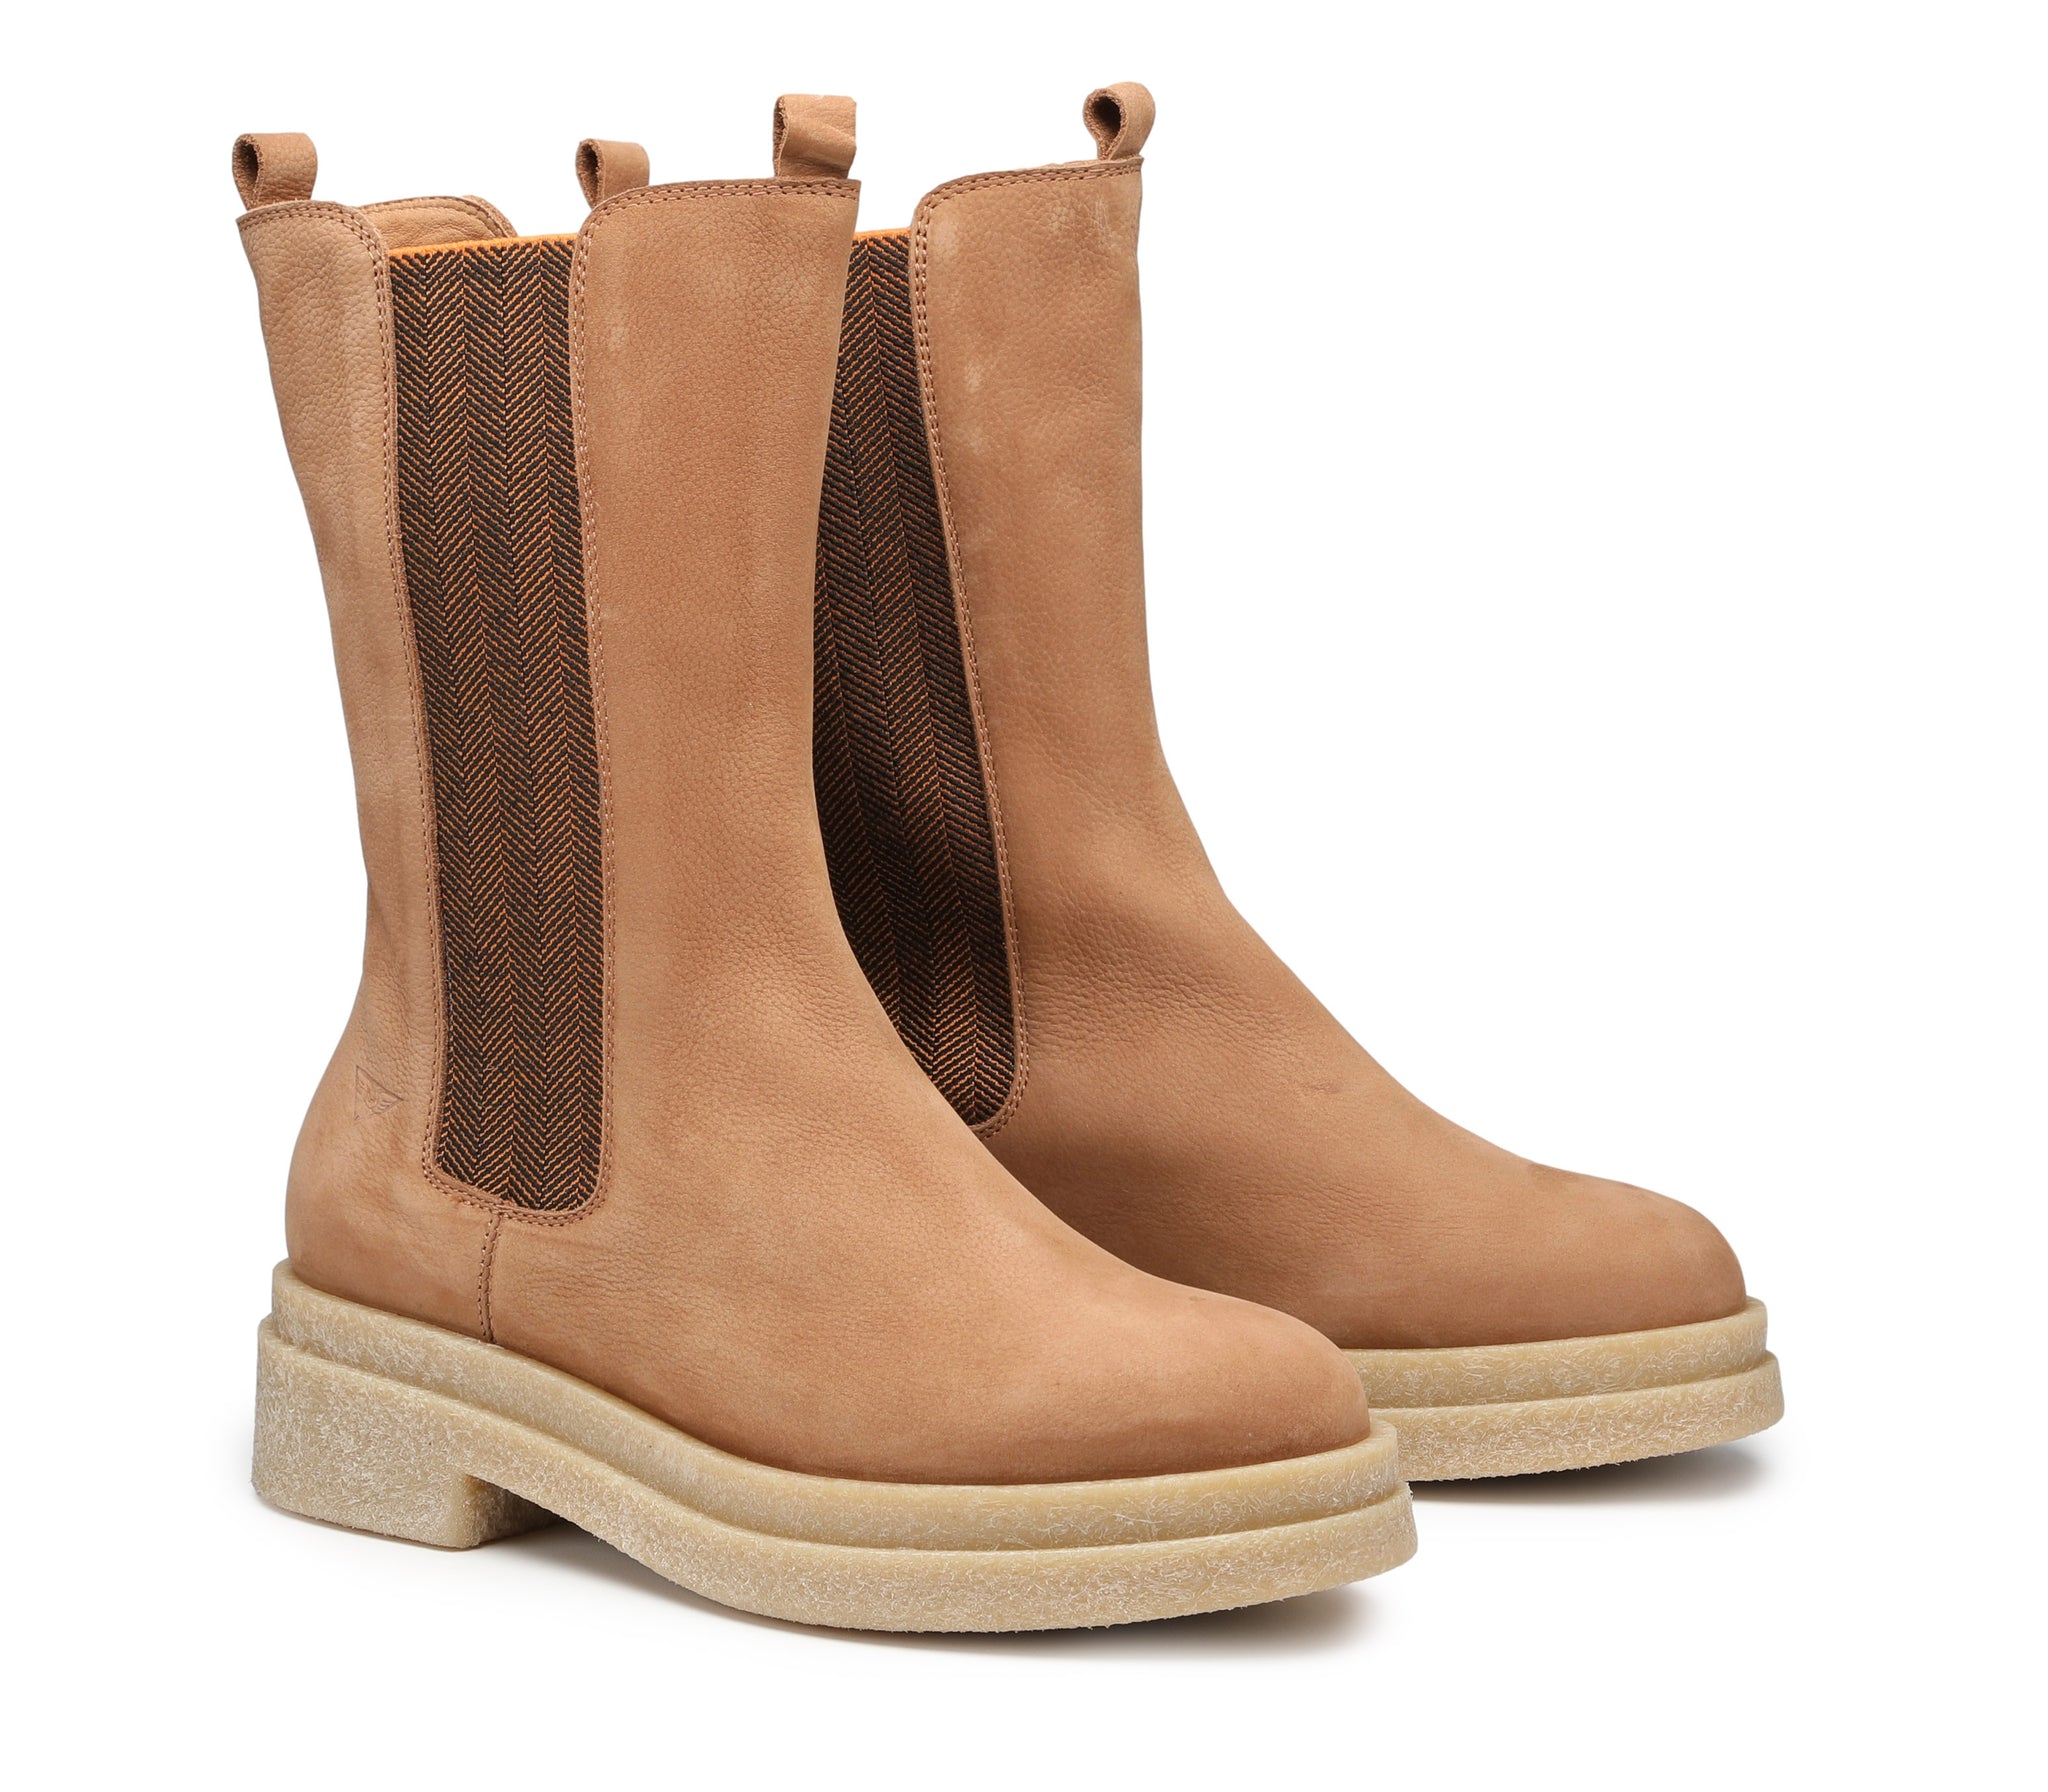 Women's Nubuck Boots with Rubber Sole